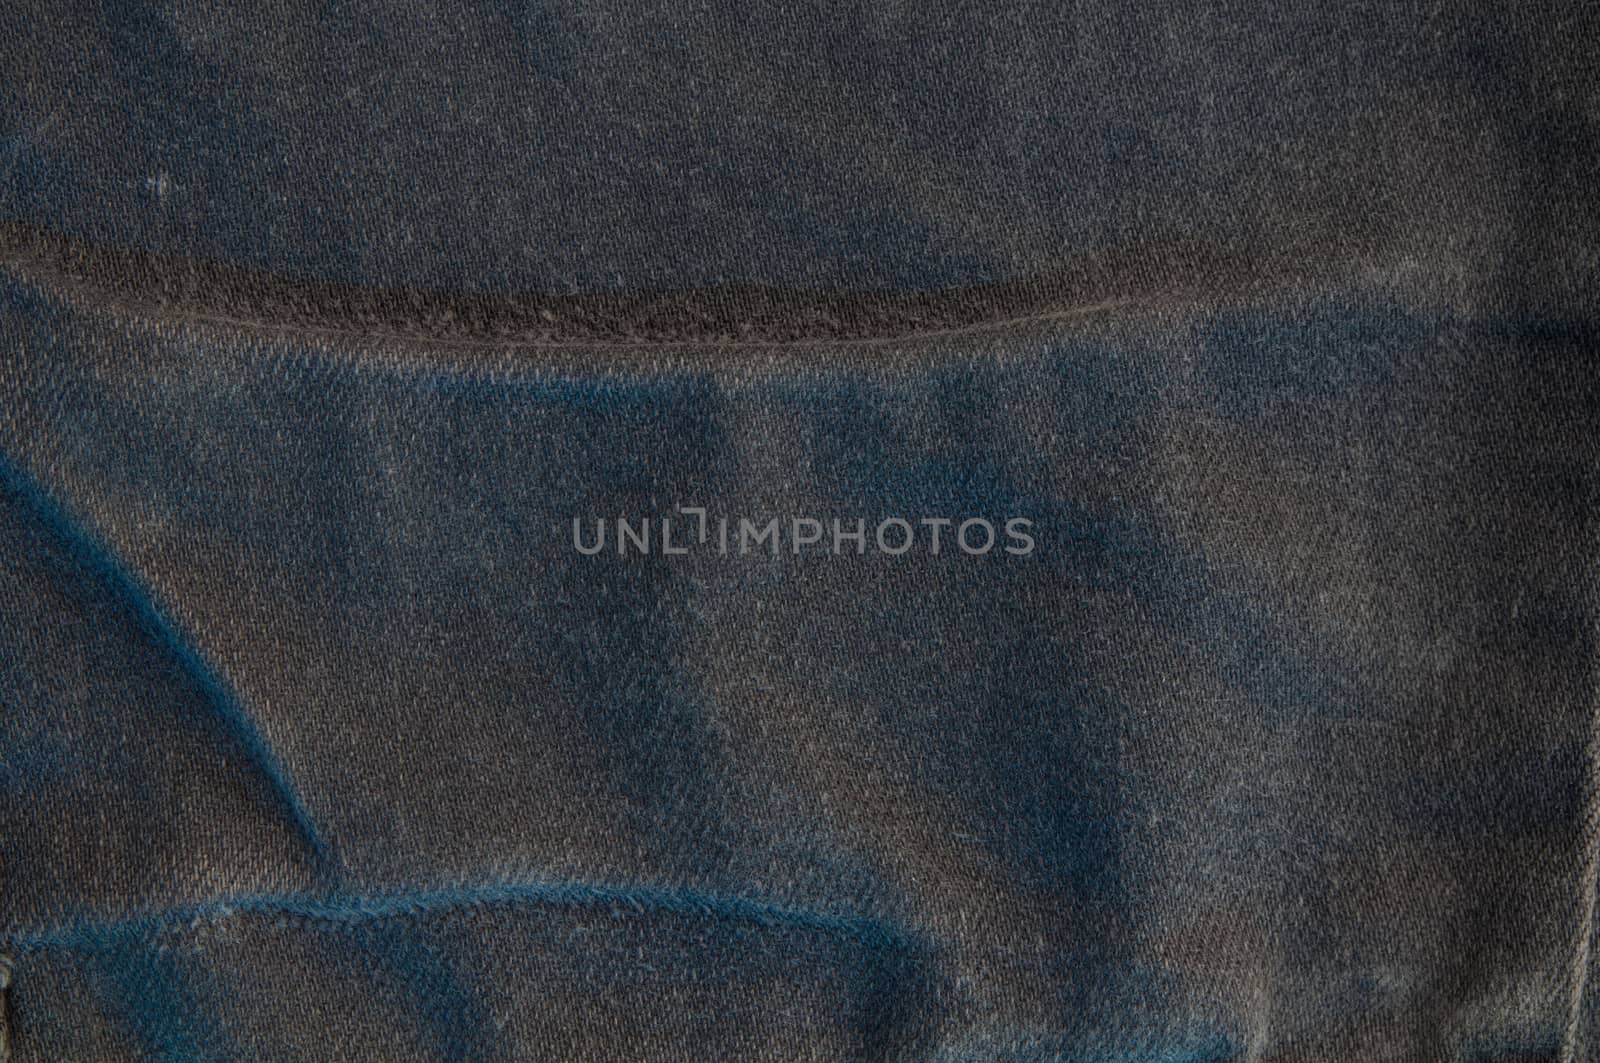 Jeans texture and for you a background